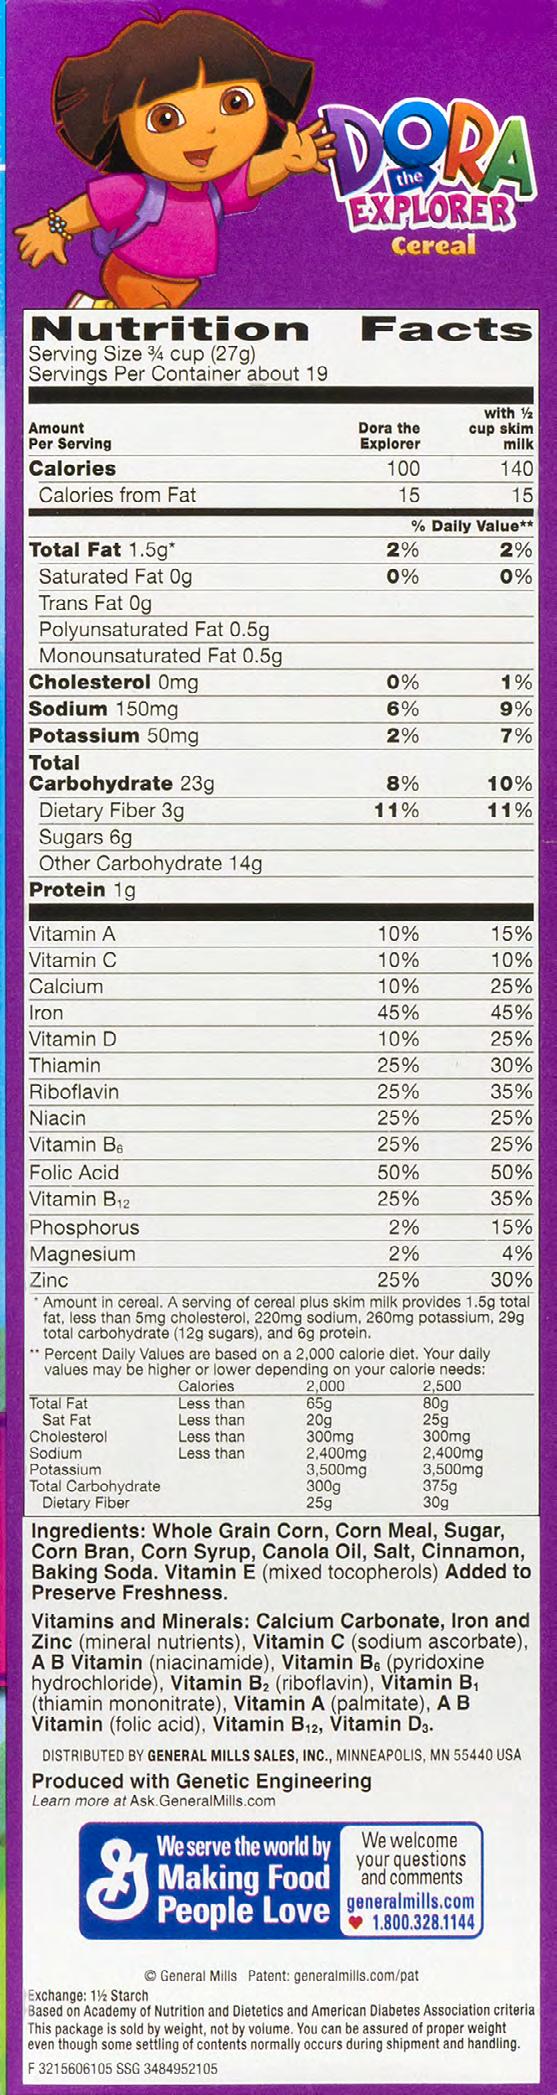 ounce. ) Find the serving size in grams at the top of the label and the sugars listed towards the middle.